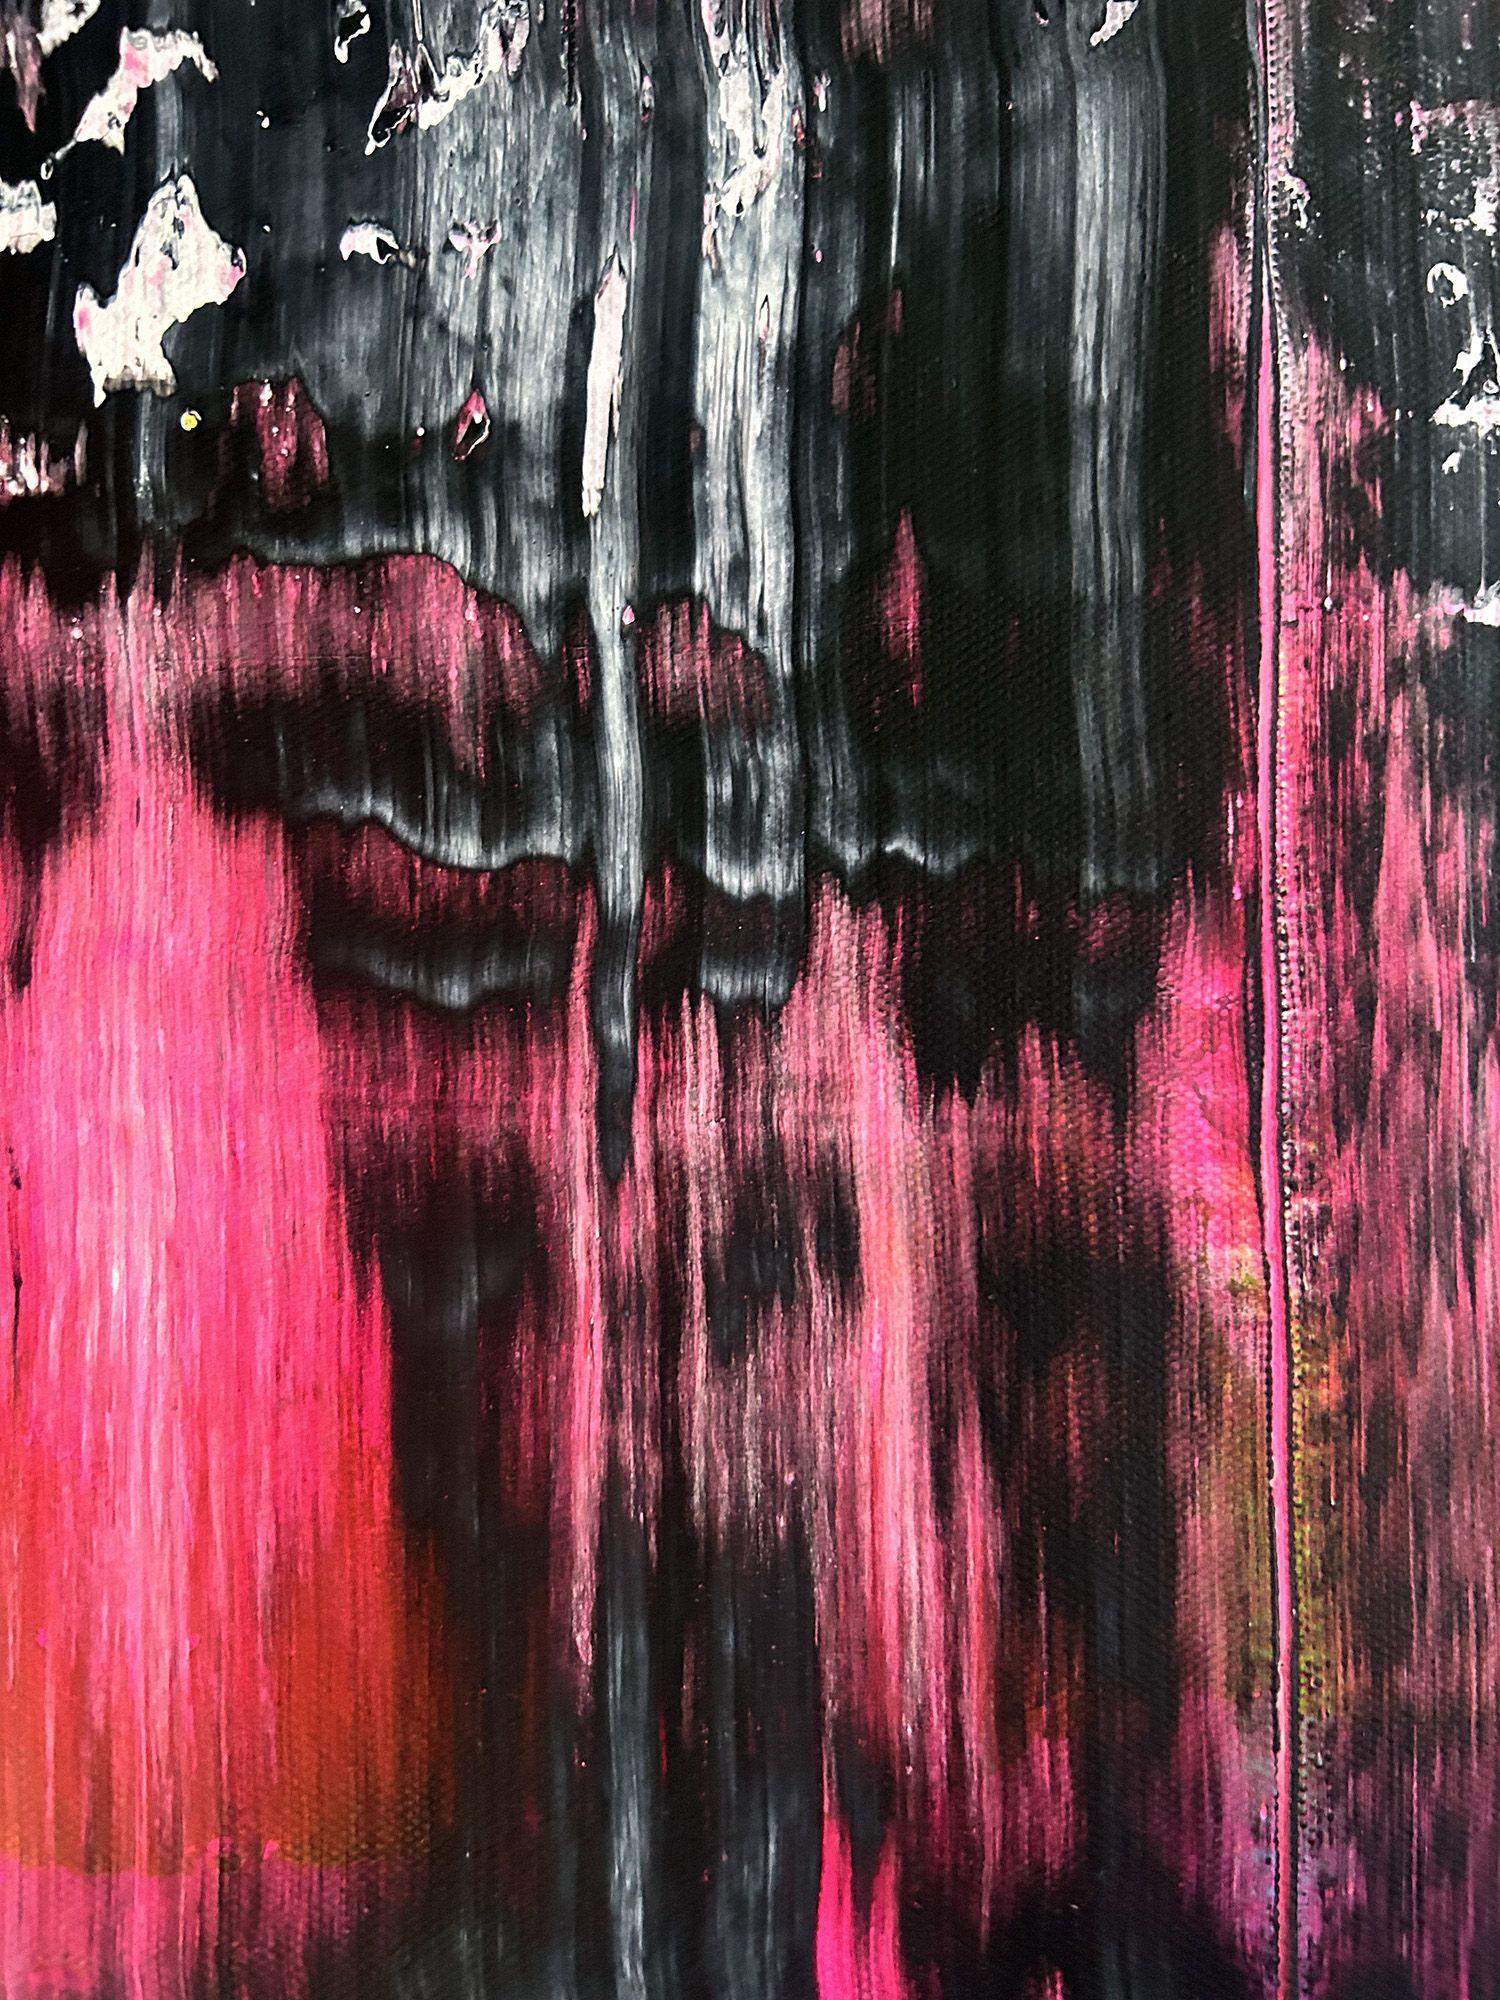 This is a unique modern PMS abstract acrylic painting that will make a statement in your home or office. This piece has a mature, beautiful and dark neutral modern design aesthetic. This painting is full of emotion and energy. It juxtaposes the cool